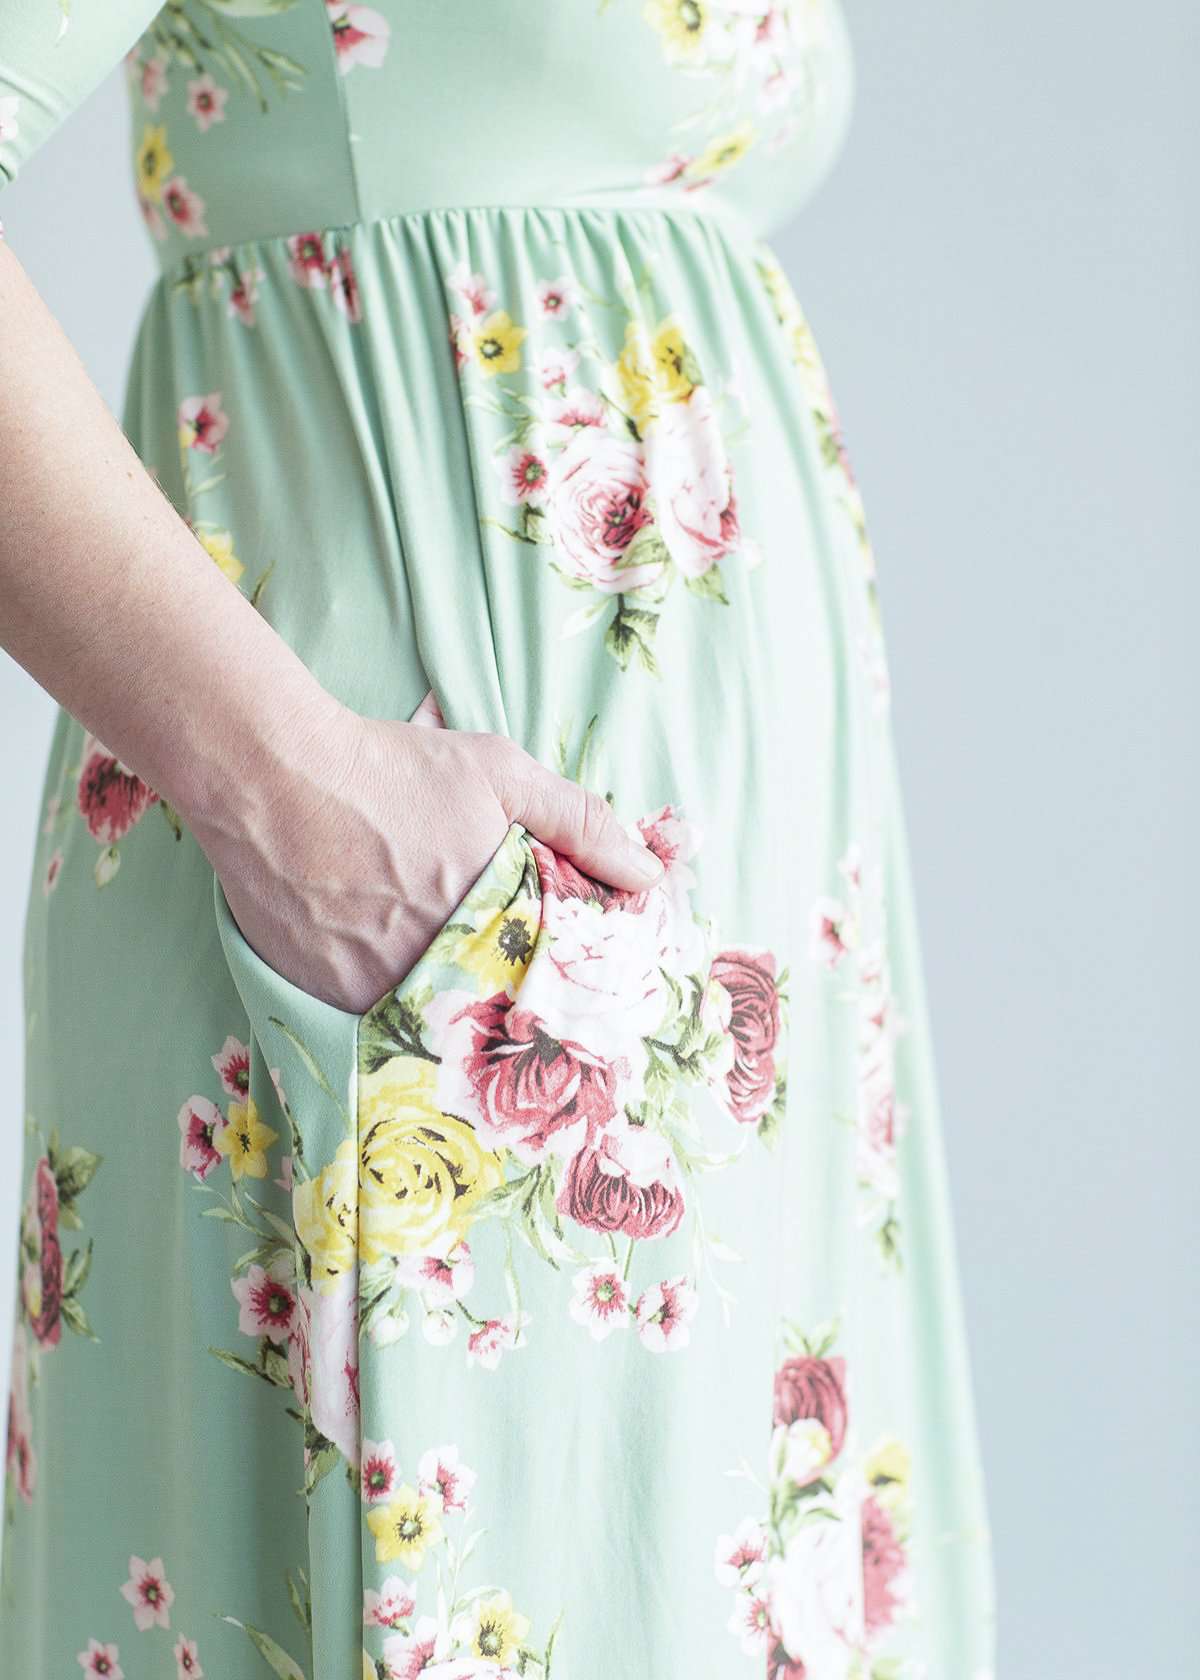 woman wearing a modest mint and floral maxi dress